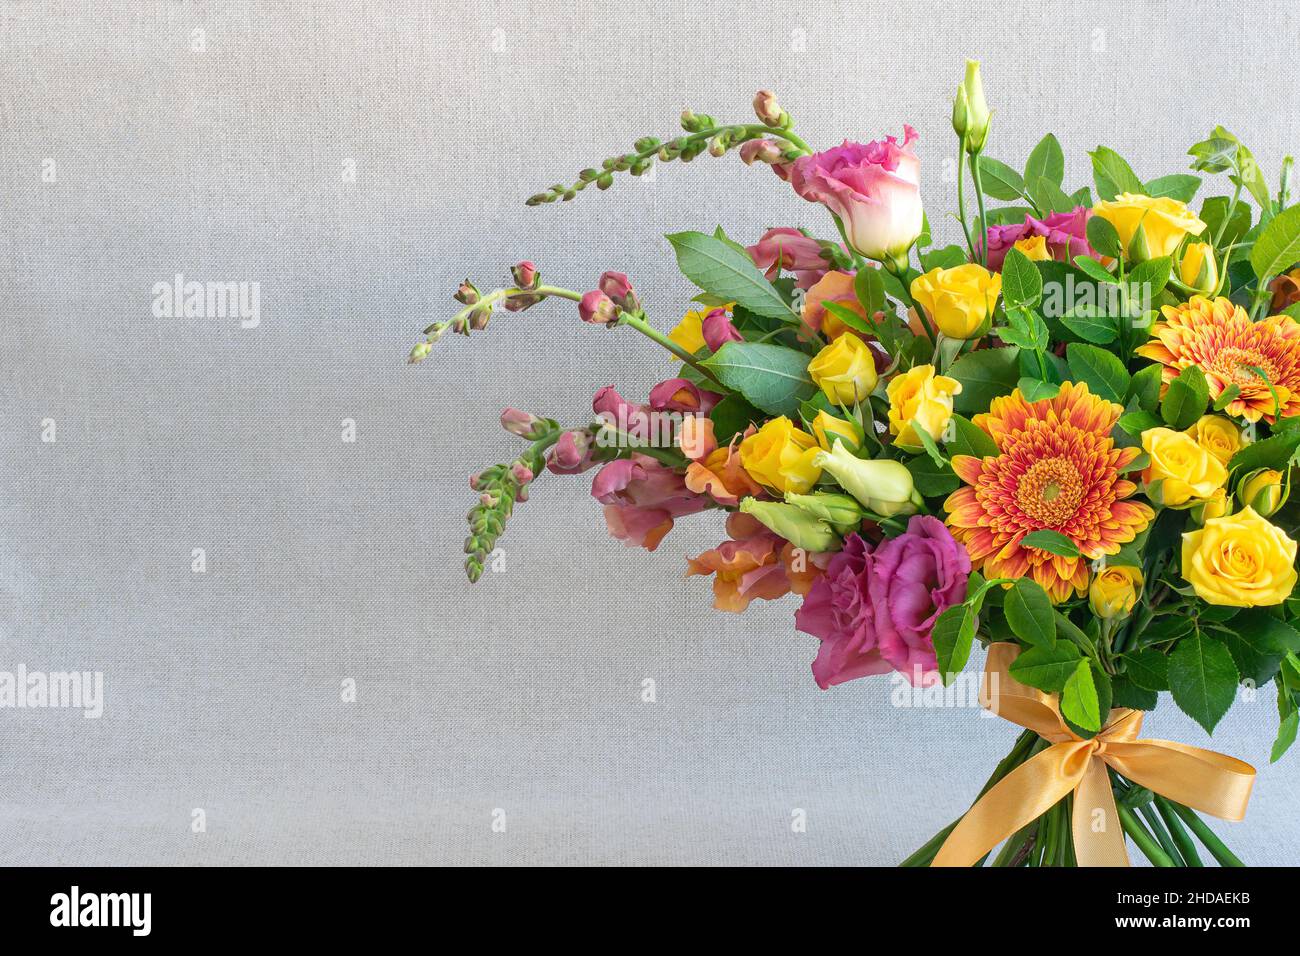 Bright bouquet of decorative and wild flowers on light background Stock Photo